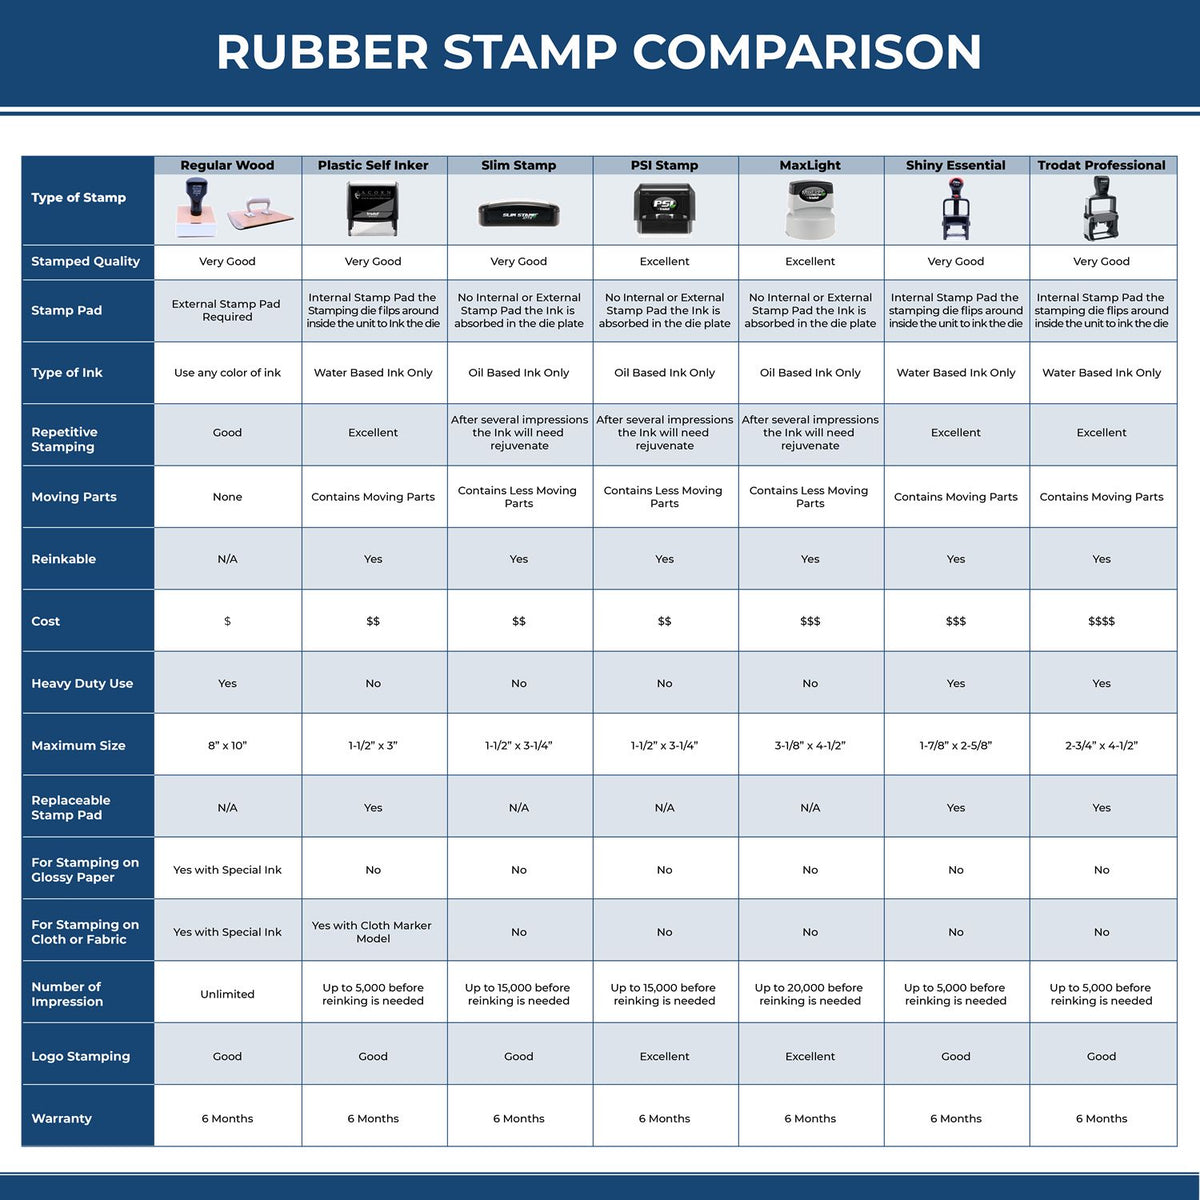 A comparison chart for the different types of mount models available for the Massachusetts Professional Engineer Seal Stamp.